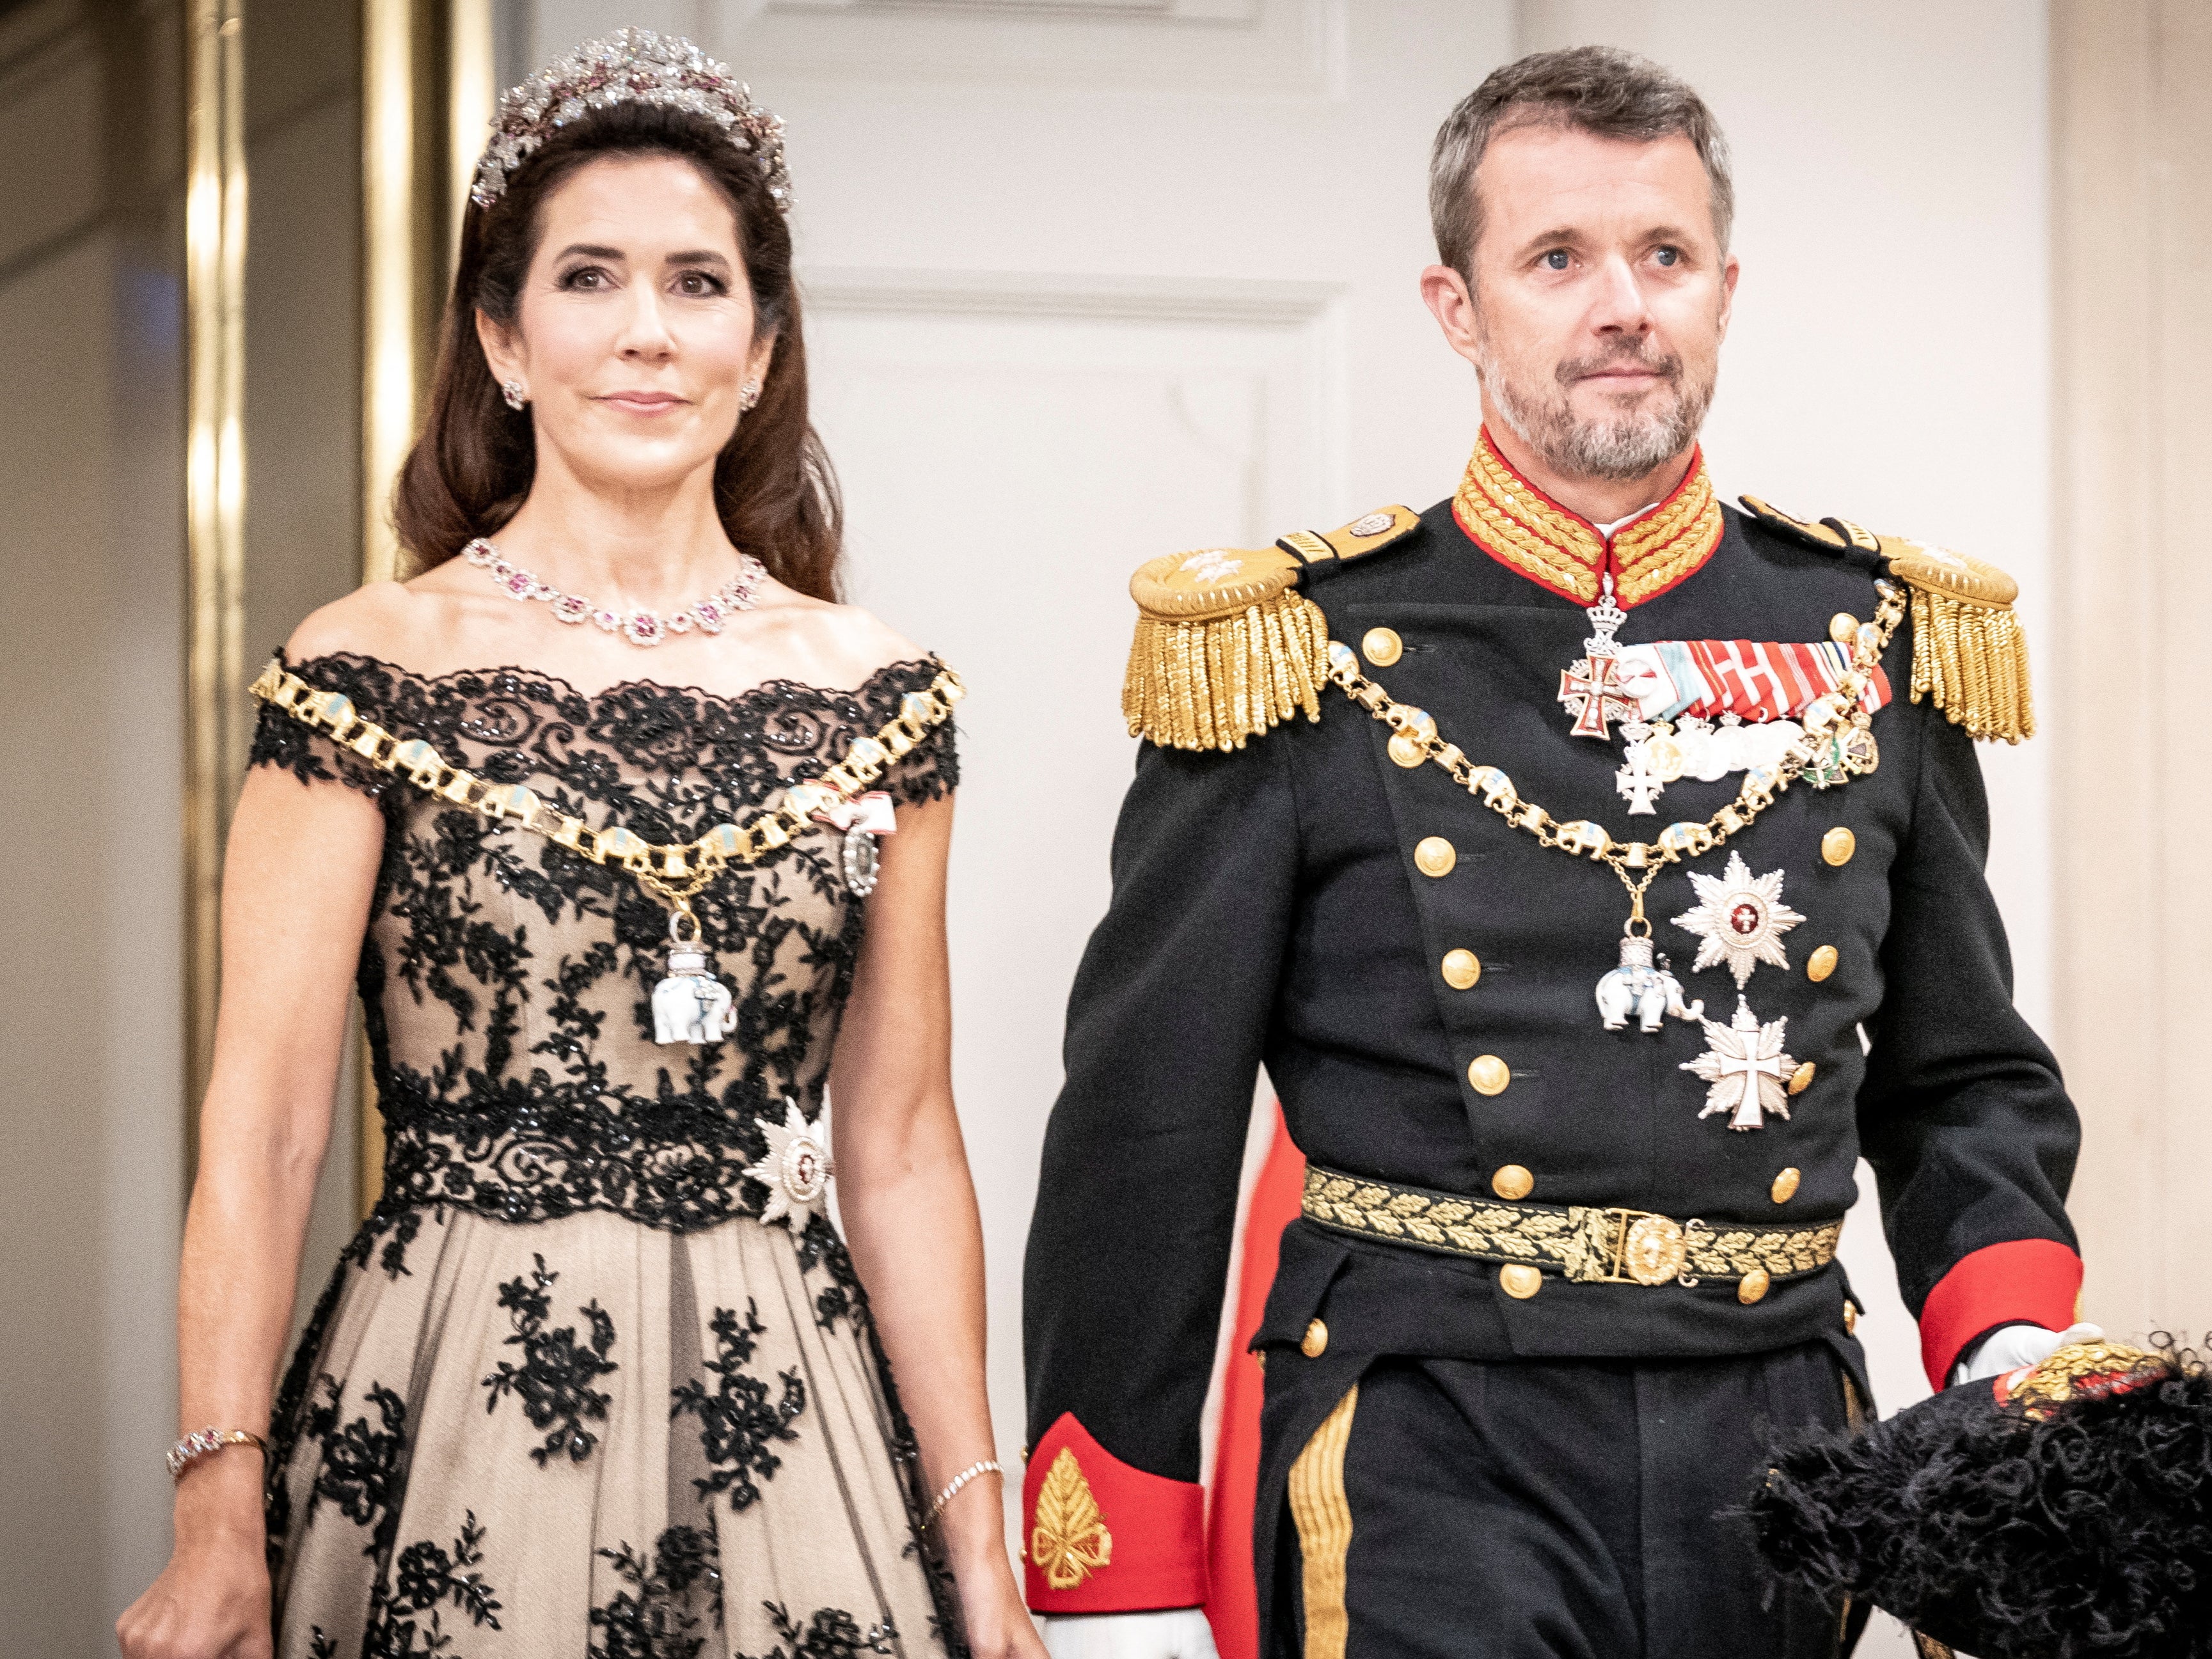 Scene change: Crown Prince Frederik – with his Australian wife Crown Princess Mary – will succeed his mother Queen Margrethe II to the Danish throne following her abdication